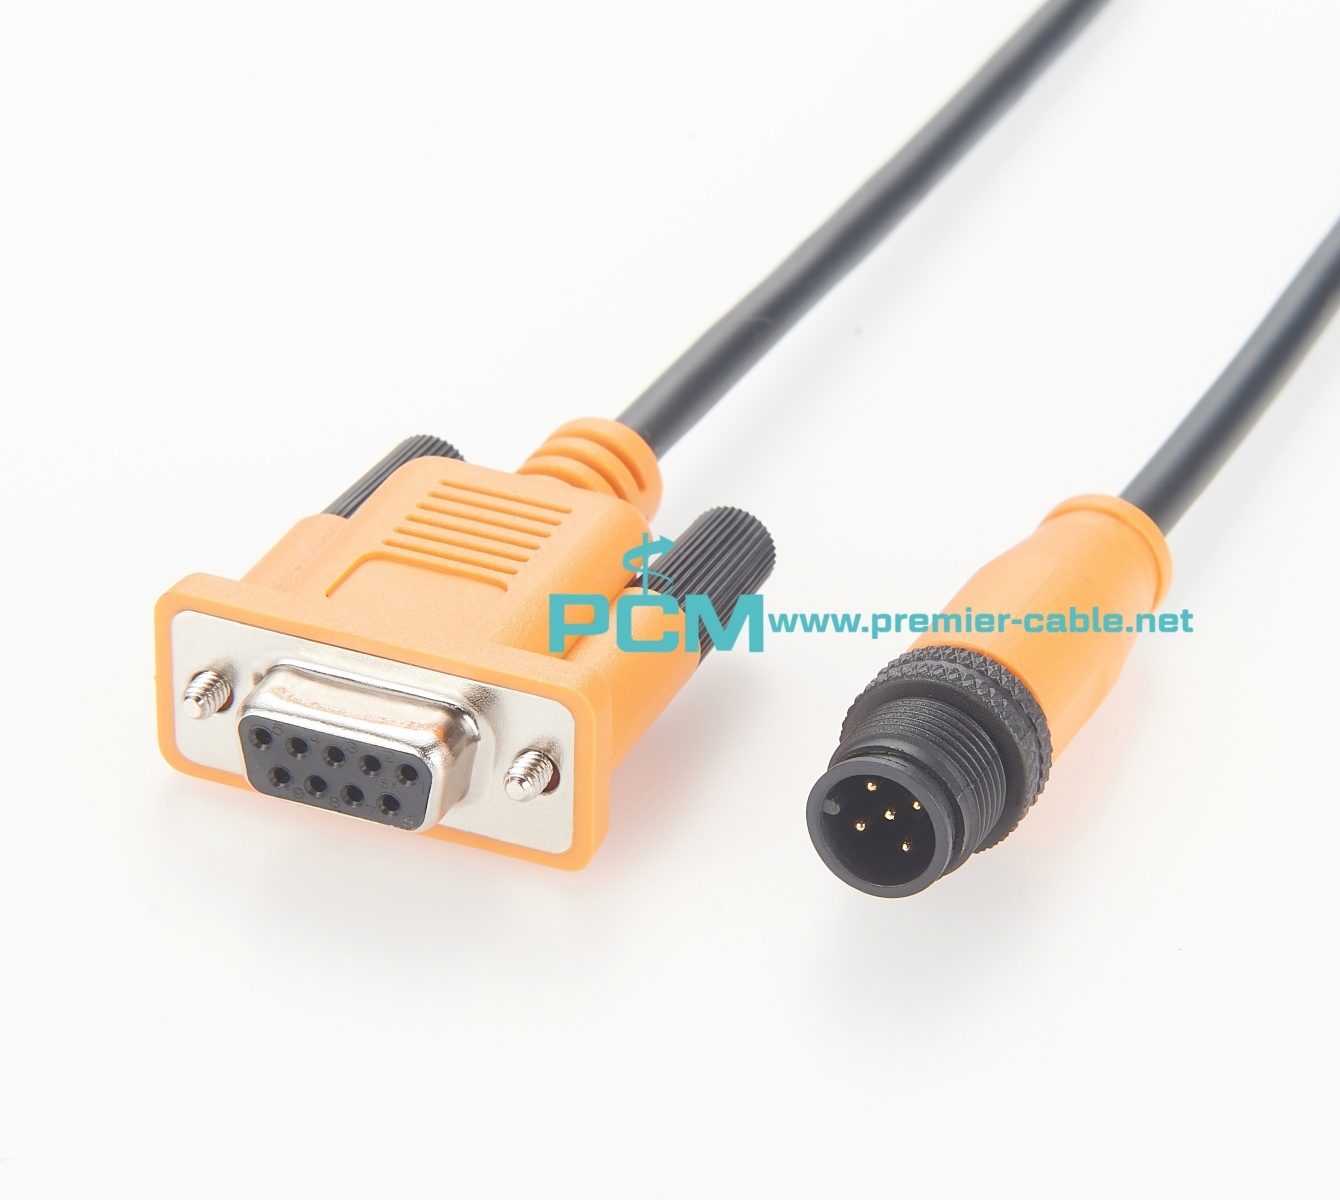 Premier Cable M12 Adapter Cable NMEA 2000 CANopen